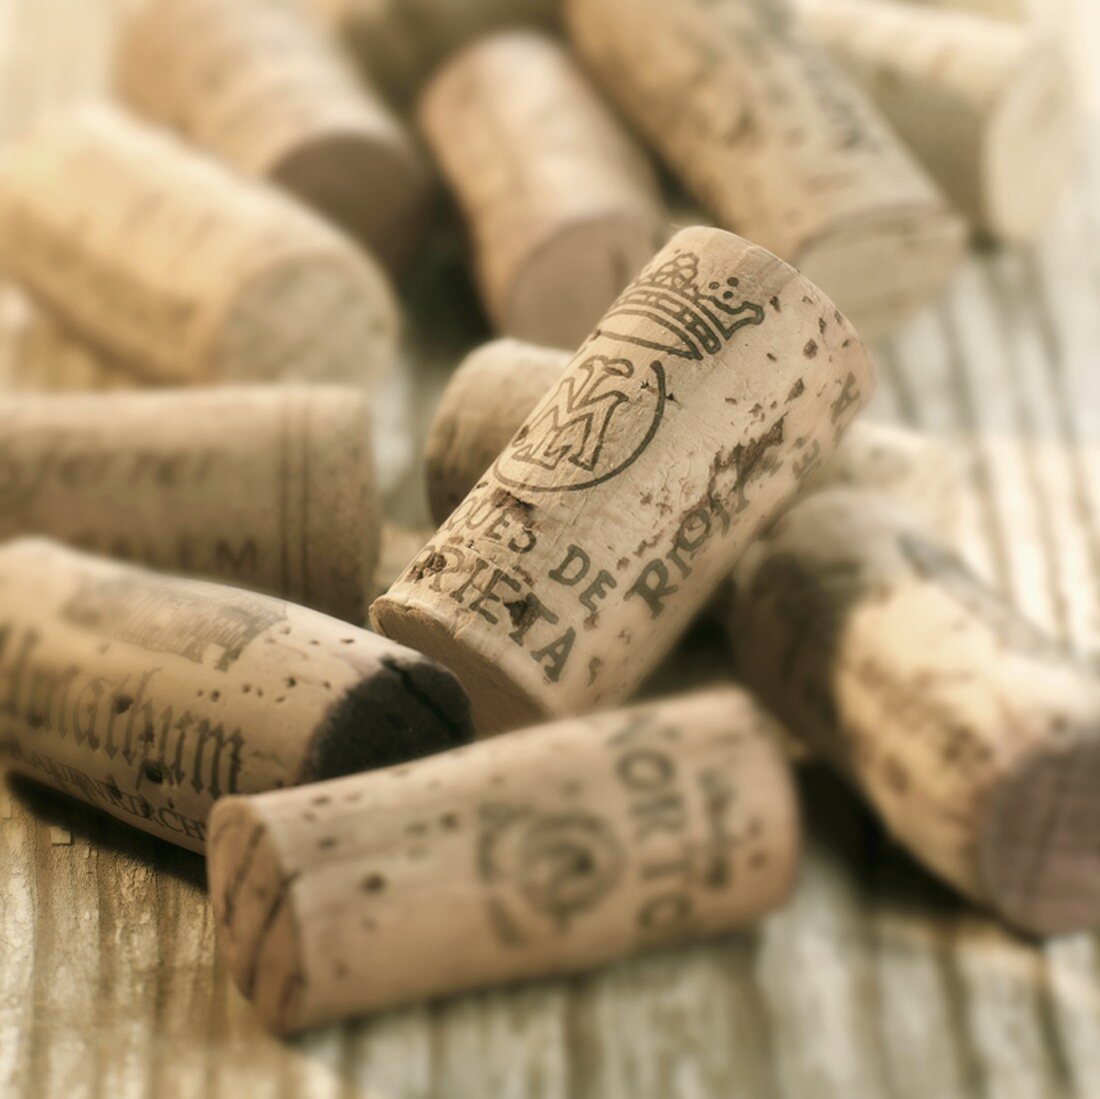 Corks from wine estates in various countries